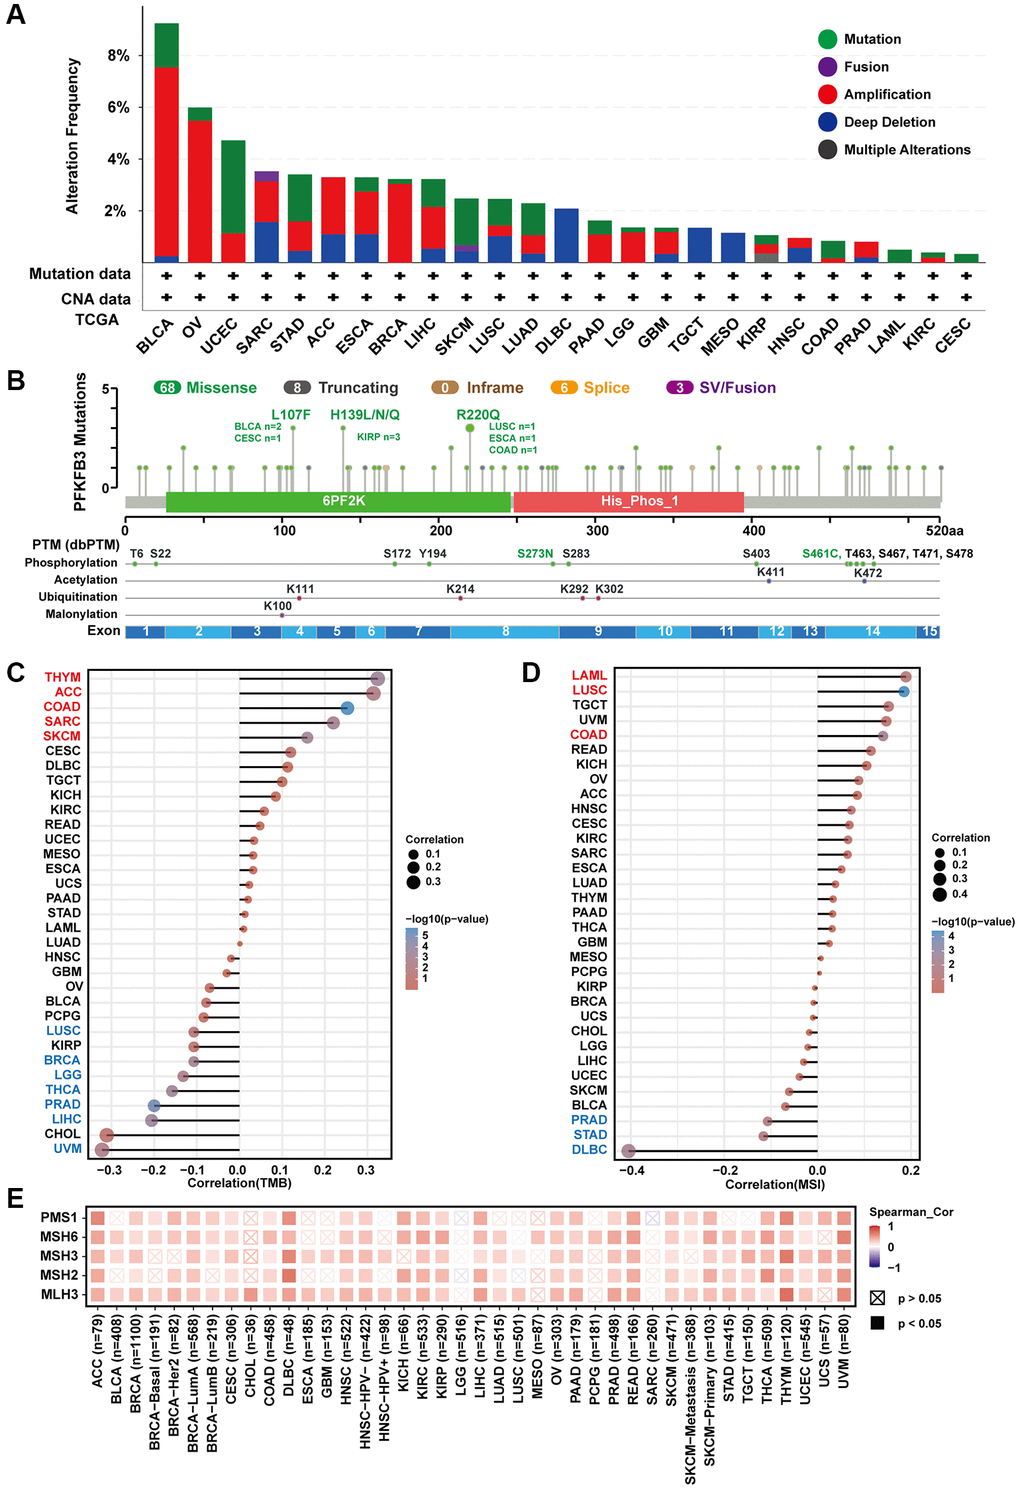 The characteristic of PFKFB3 mutation and the relationship between TMB, MSI, and MMRs in pan-cancer. (A) We utilized the cBioPortal tool to study the genomic alteration of PFKFB3 for different tumors. (B) The characteristic of PFKFB3 mutations and posttranscriptional modification. (C) The relationship between PFKFB3 expression and TMB in various malignancies. (D) The association between PFKFB3 expression and MSI in pan-cancer. In Figure 3C and 3D, red fonts indicate a positive correlation and blue fonts indicate a negative correlation. (E) Correlation between PFKFB3 expression and MMRs.